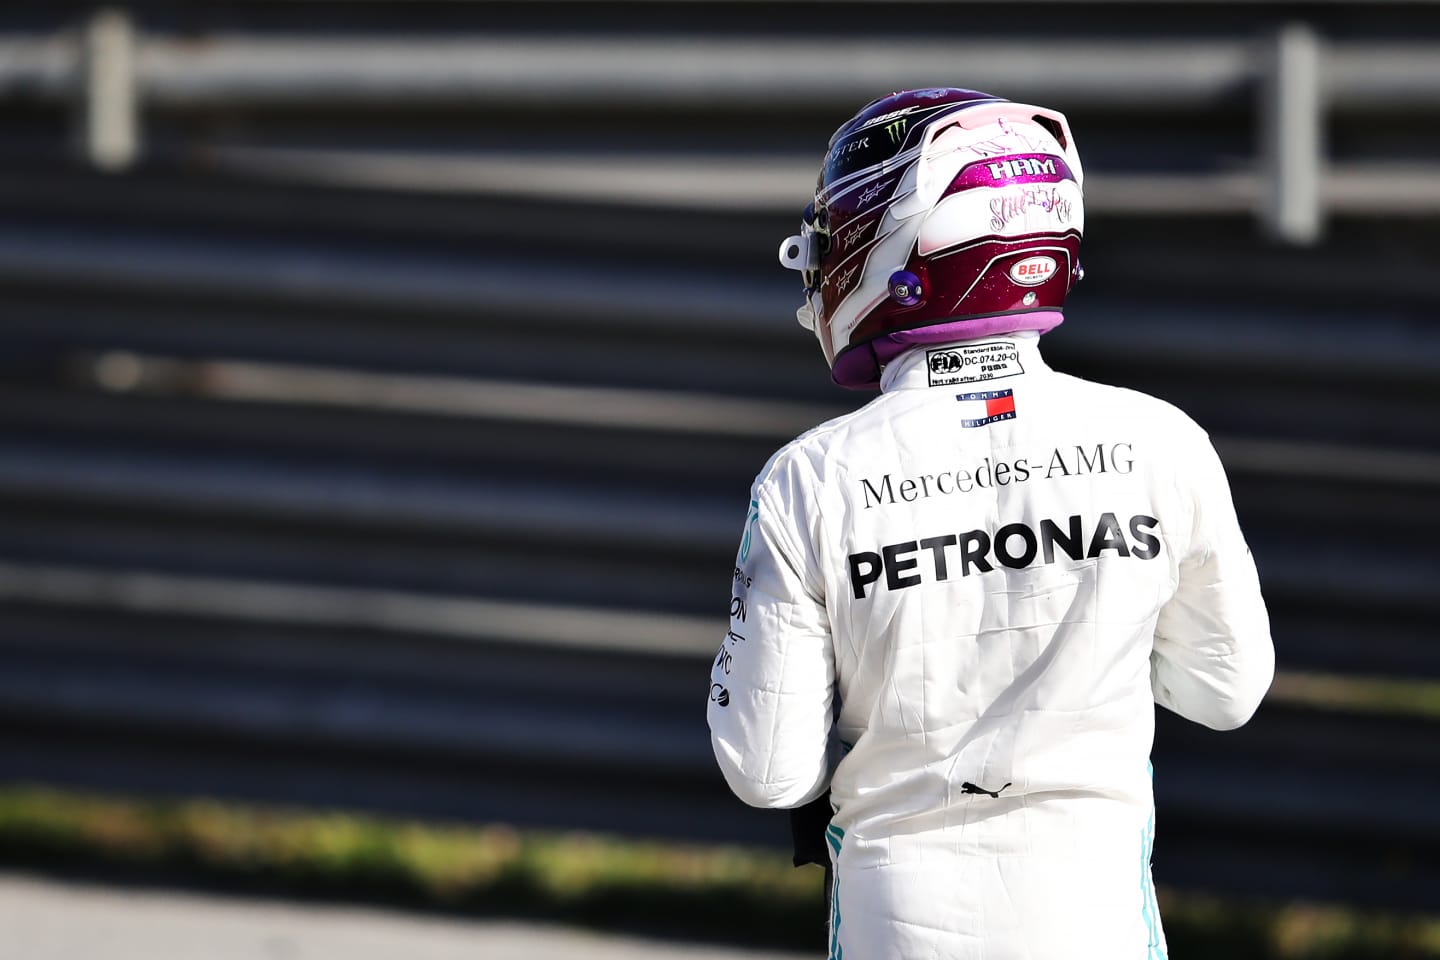 BARCELONA, SPAIN - FEBRUARY 27: Lewis Hamilton of Great Britain and Mercedes GP walks on a circuit